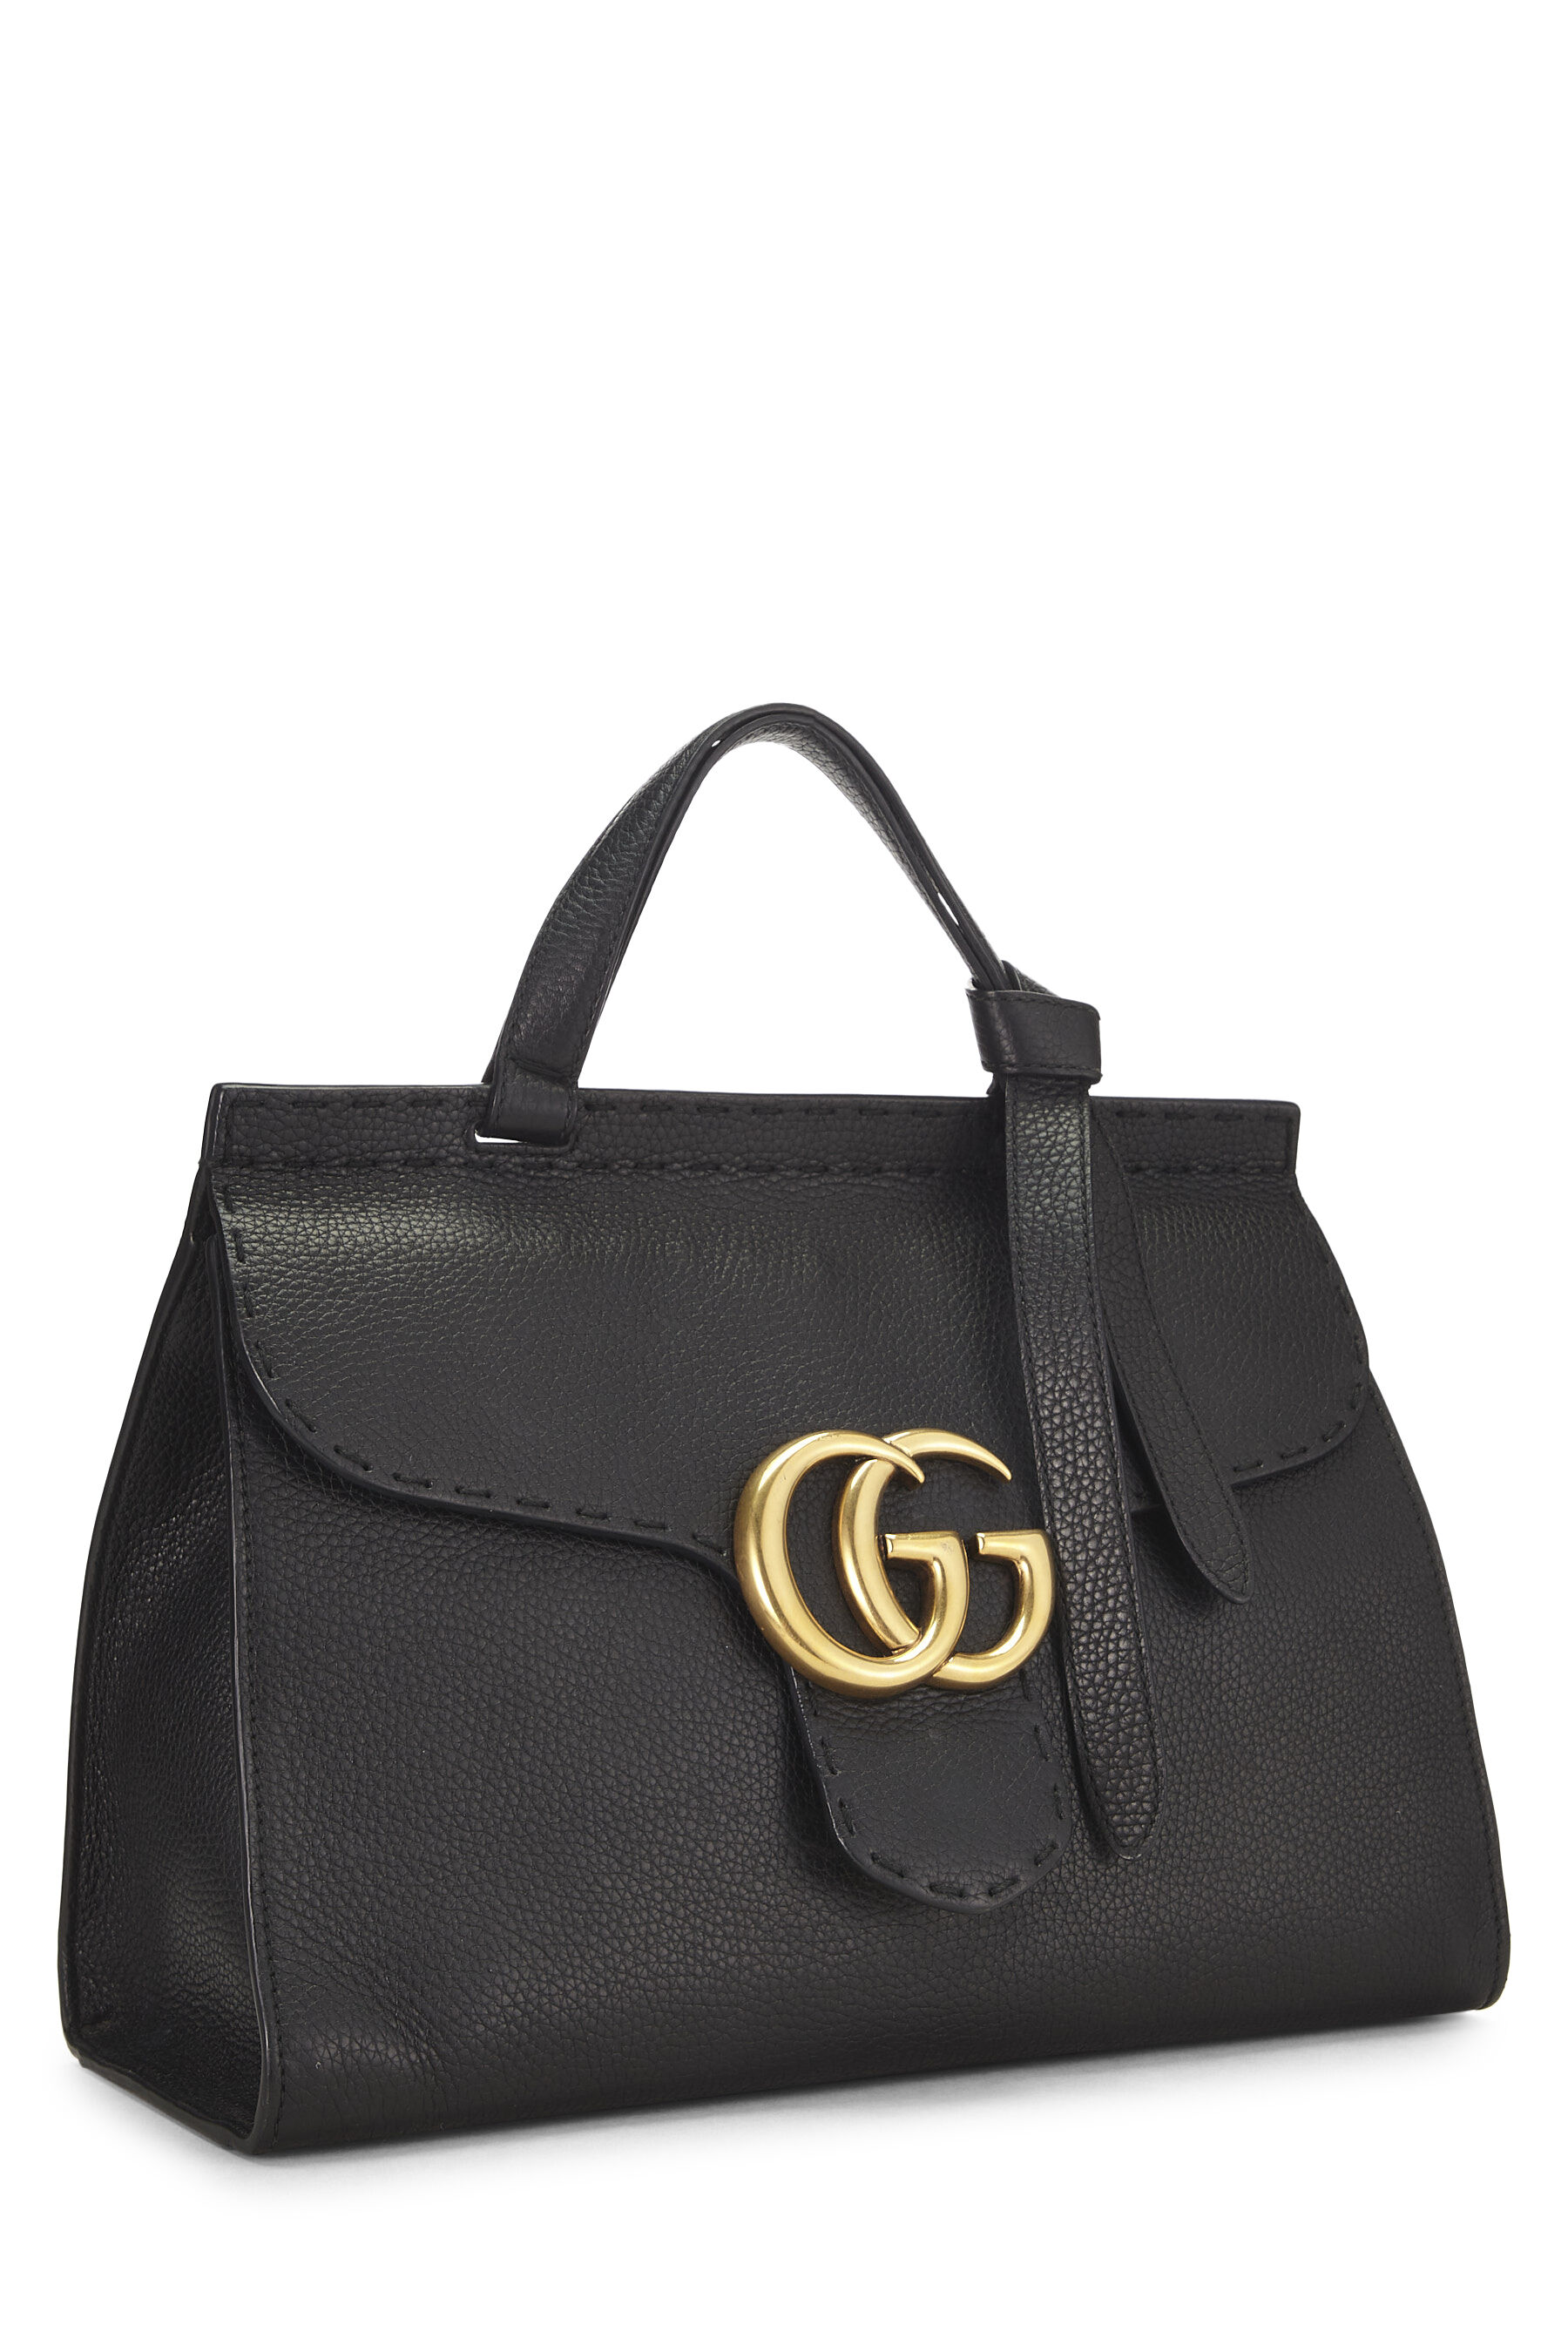 Black Leather GG Marmont Top Handle Flap Bag Small